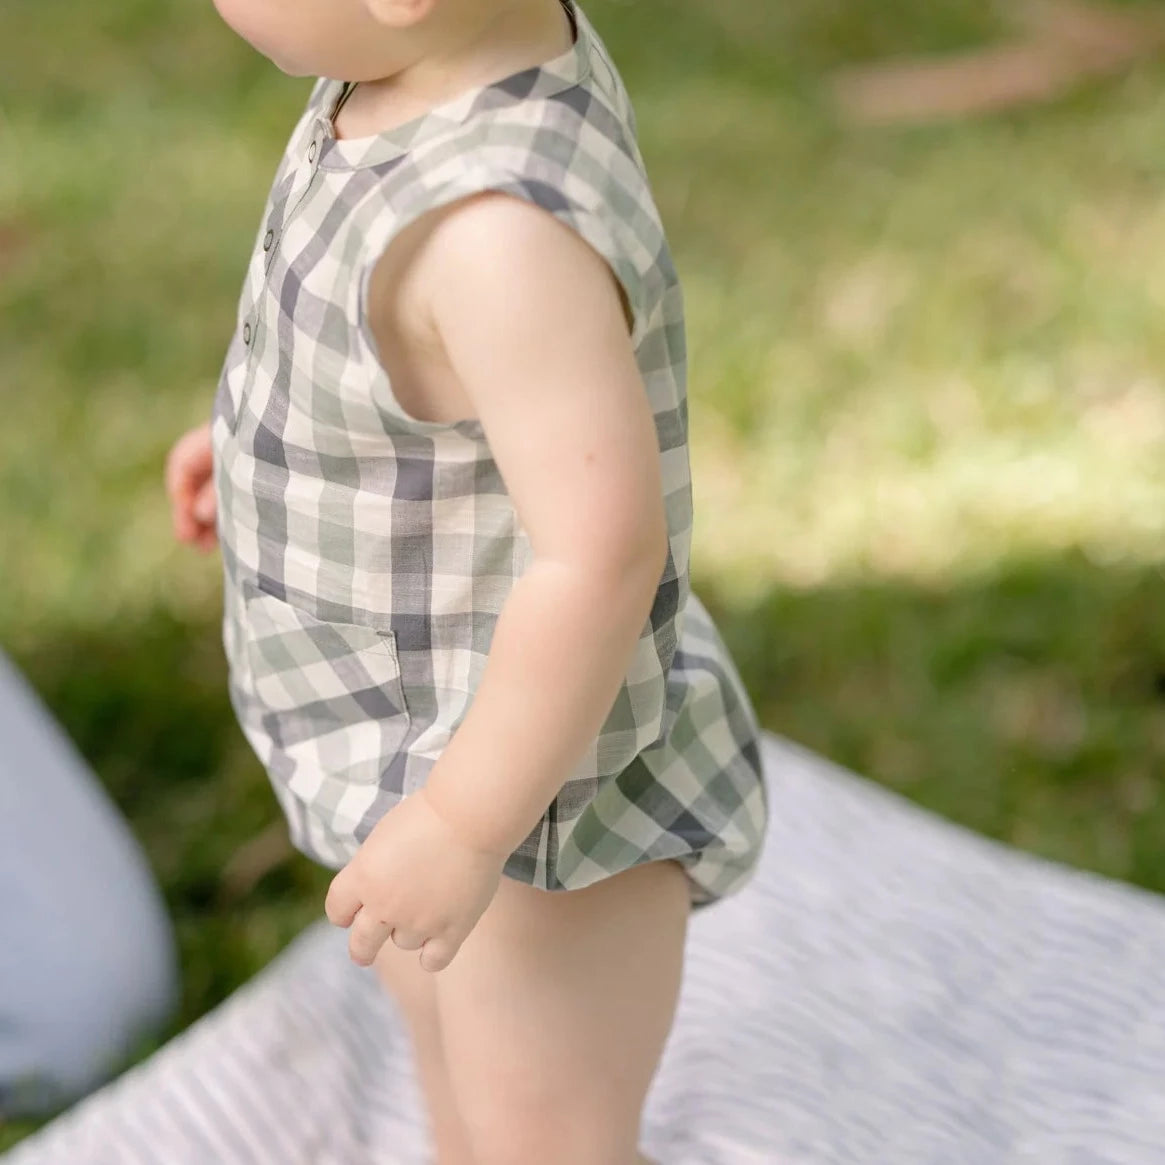 Baby wearing checkered romper on standing on grass